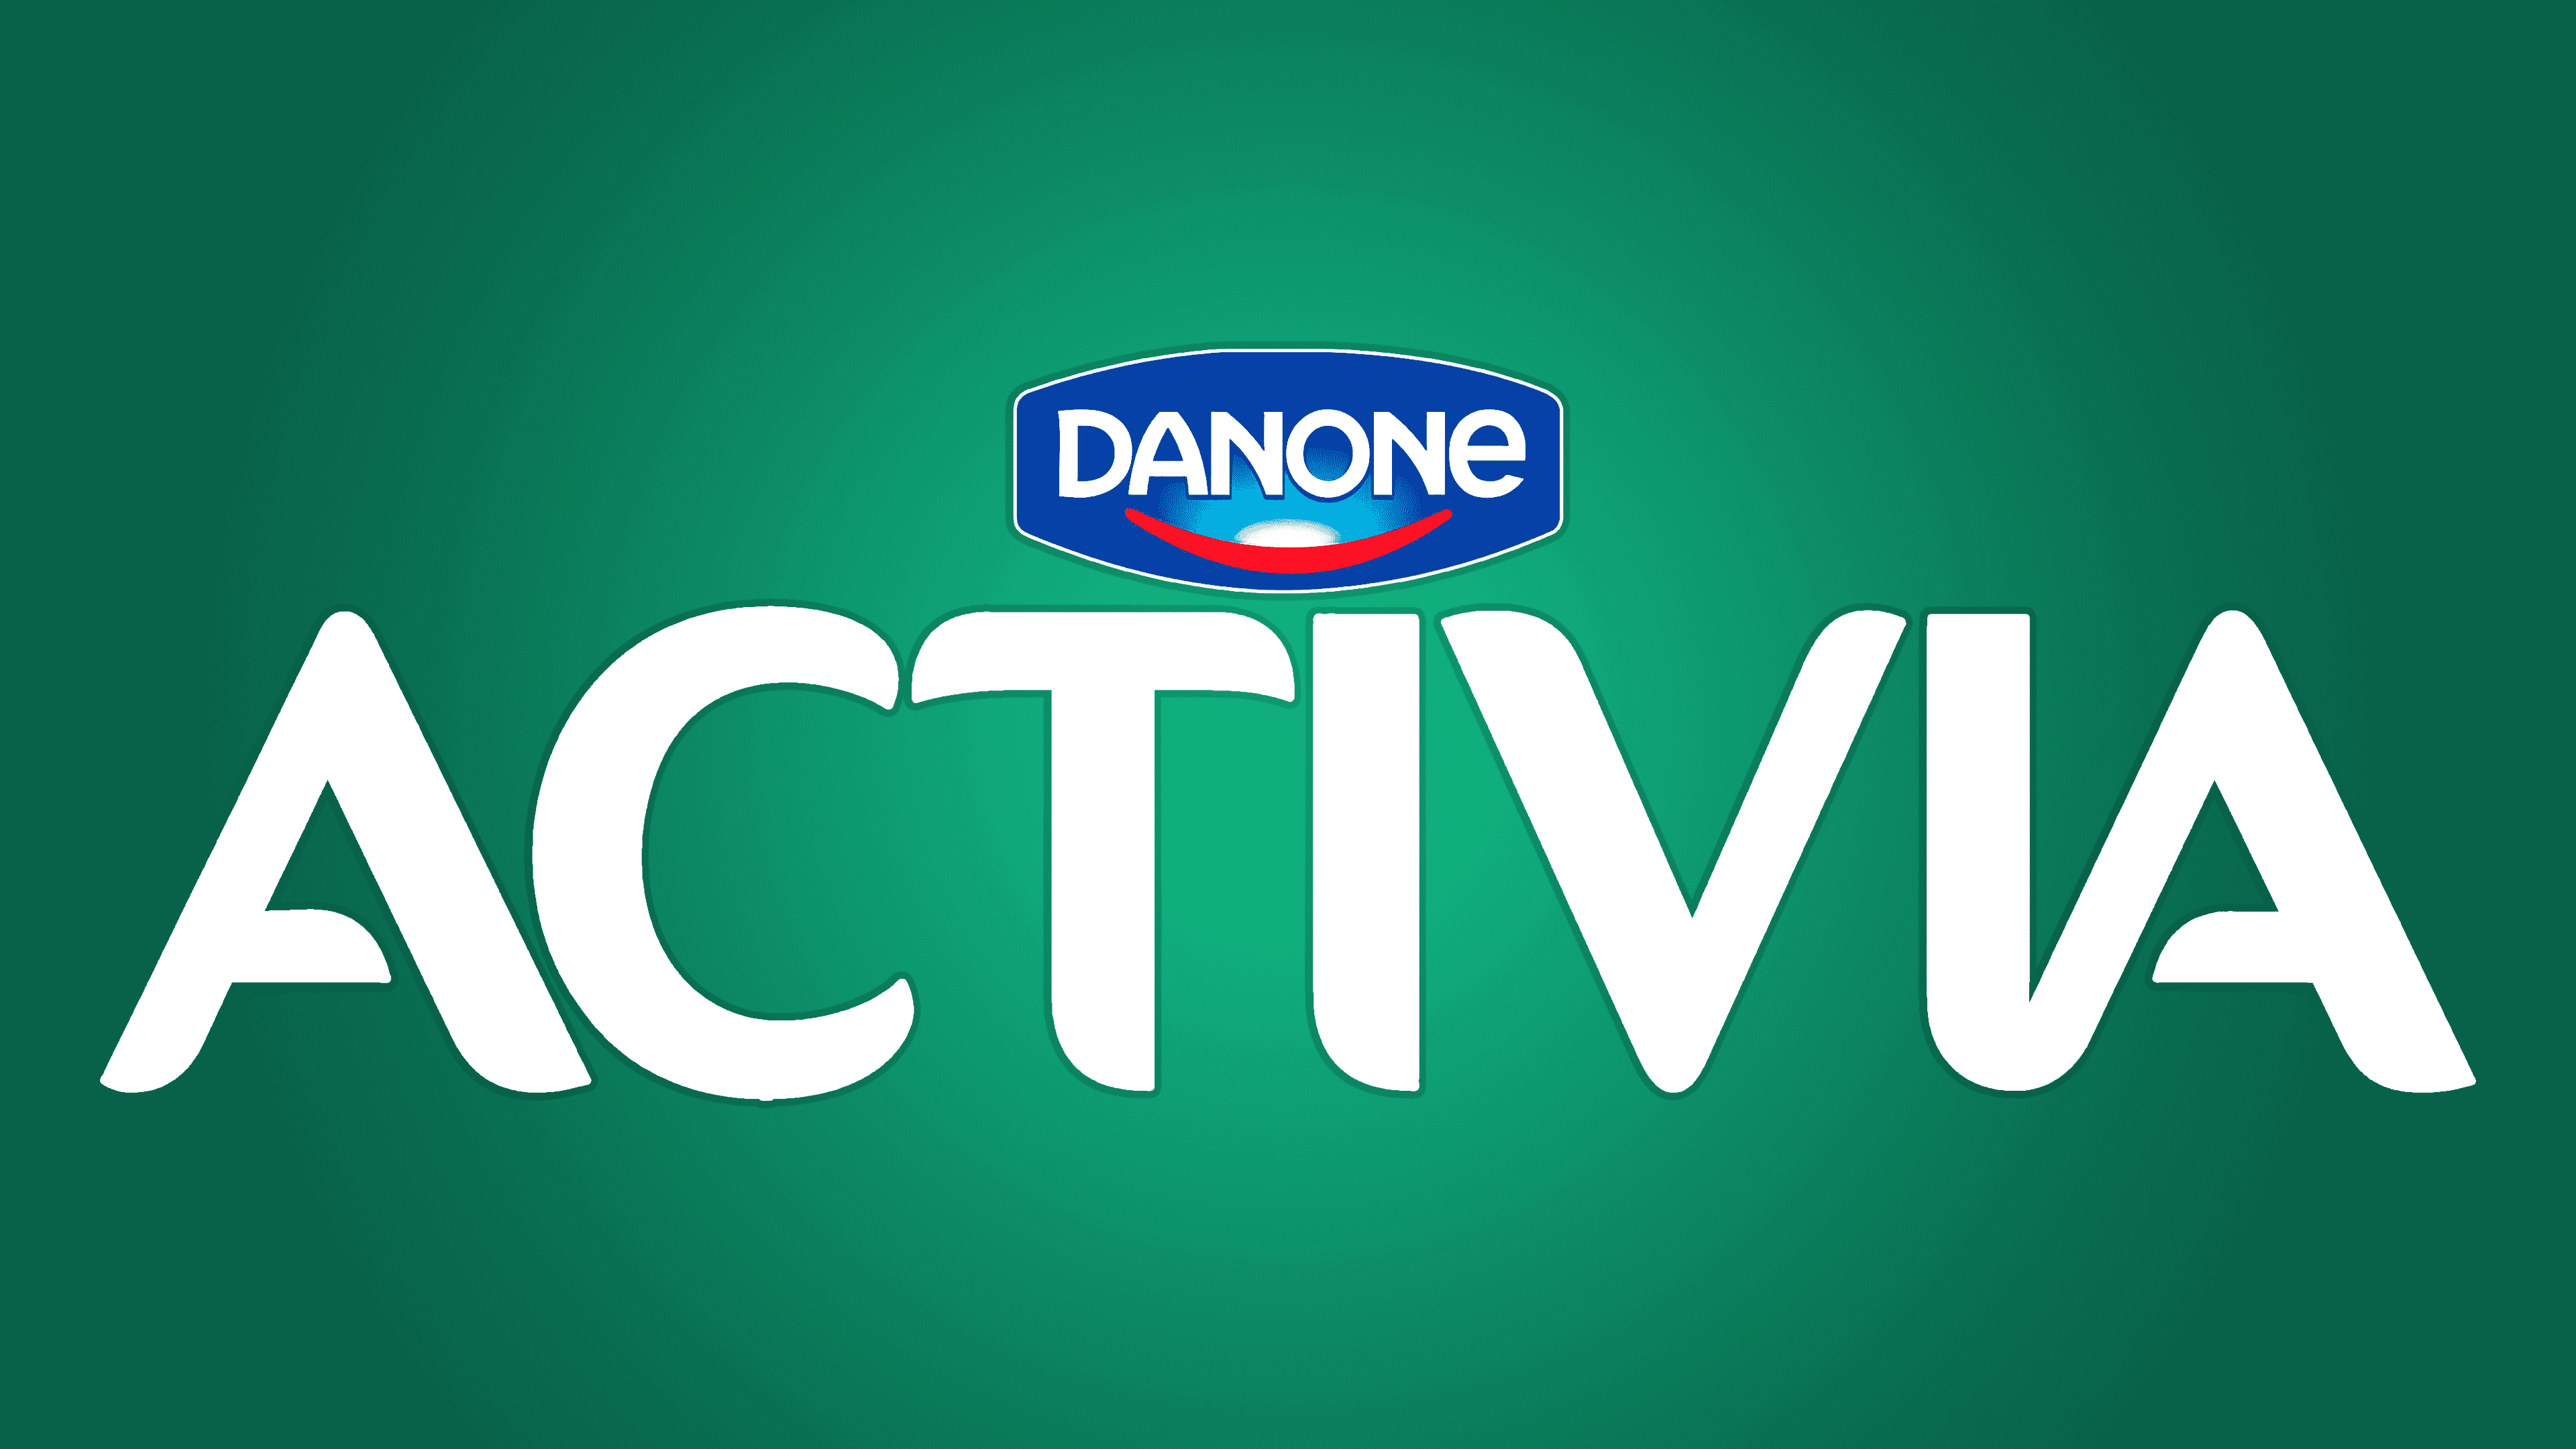 Activia logo and symbol, meaning, history, PNG